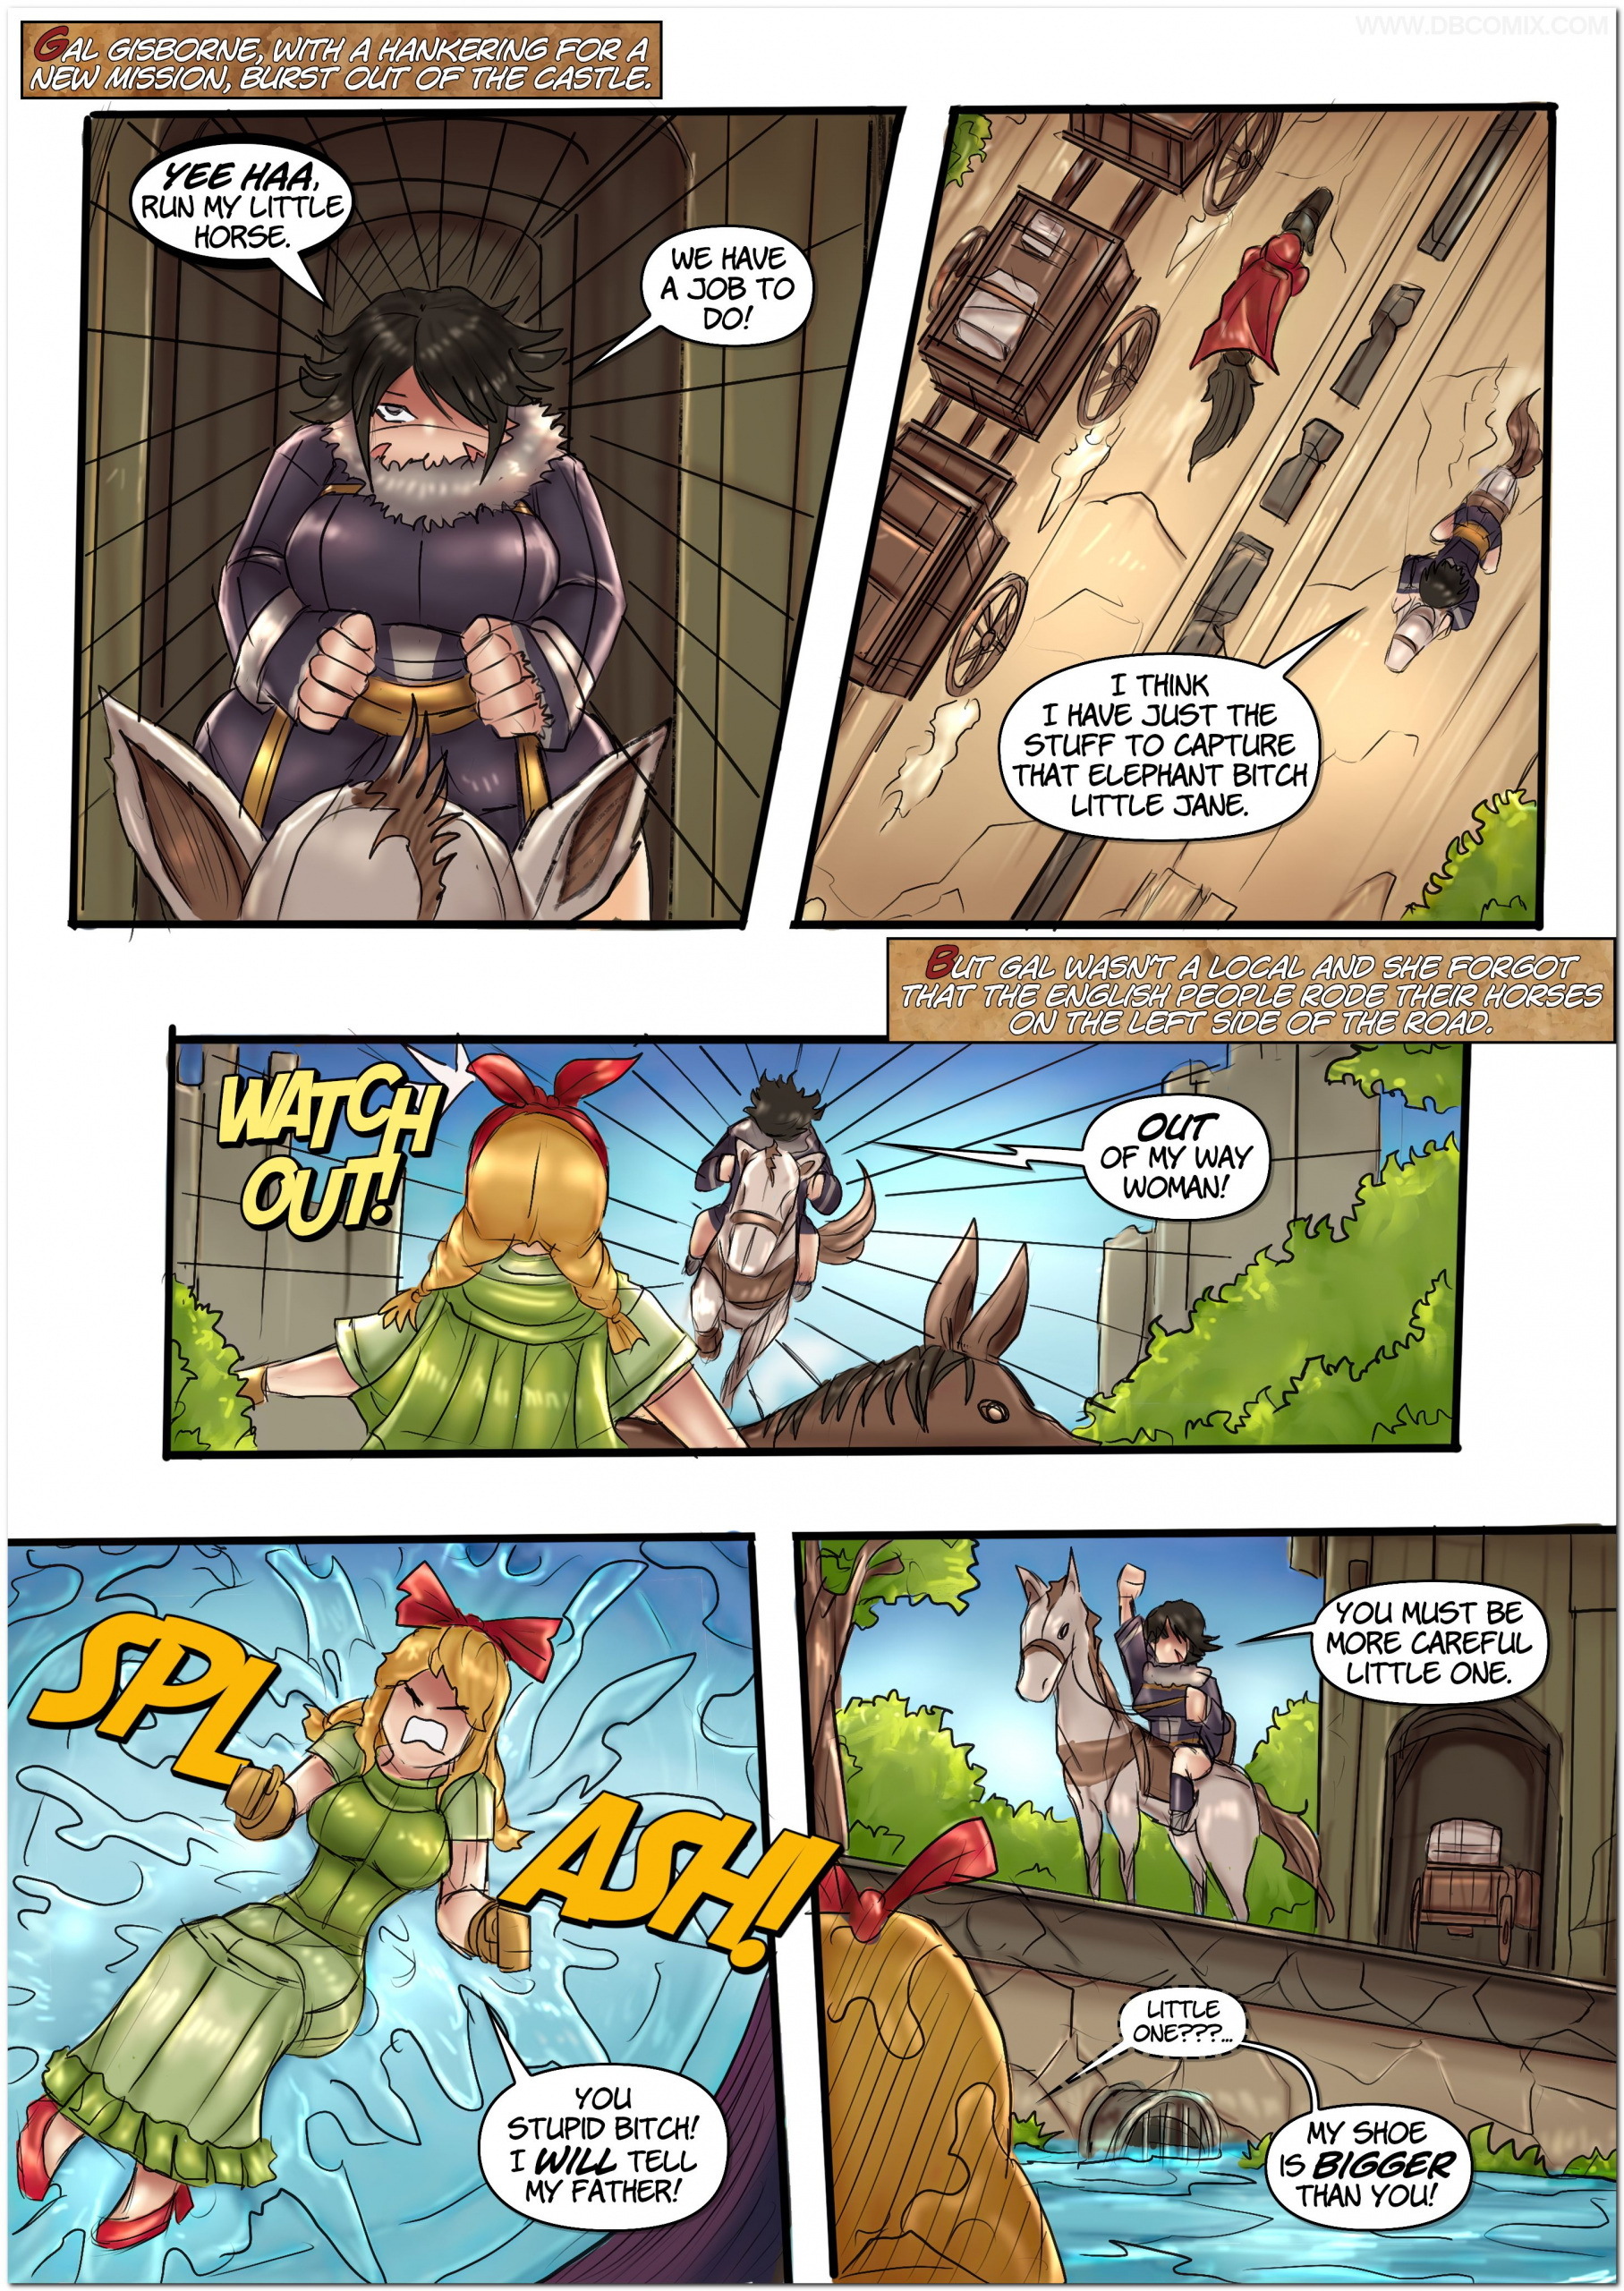 Robin Hood the Queen of Thieves 3 - Page 7